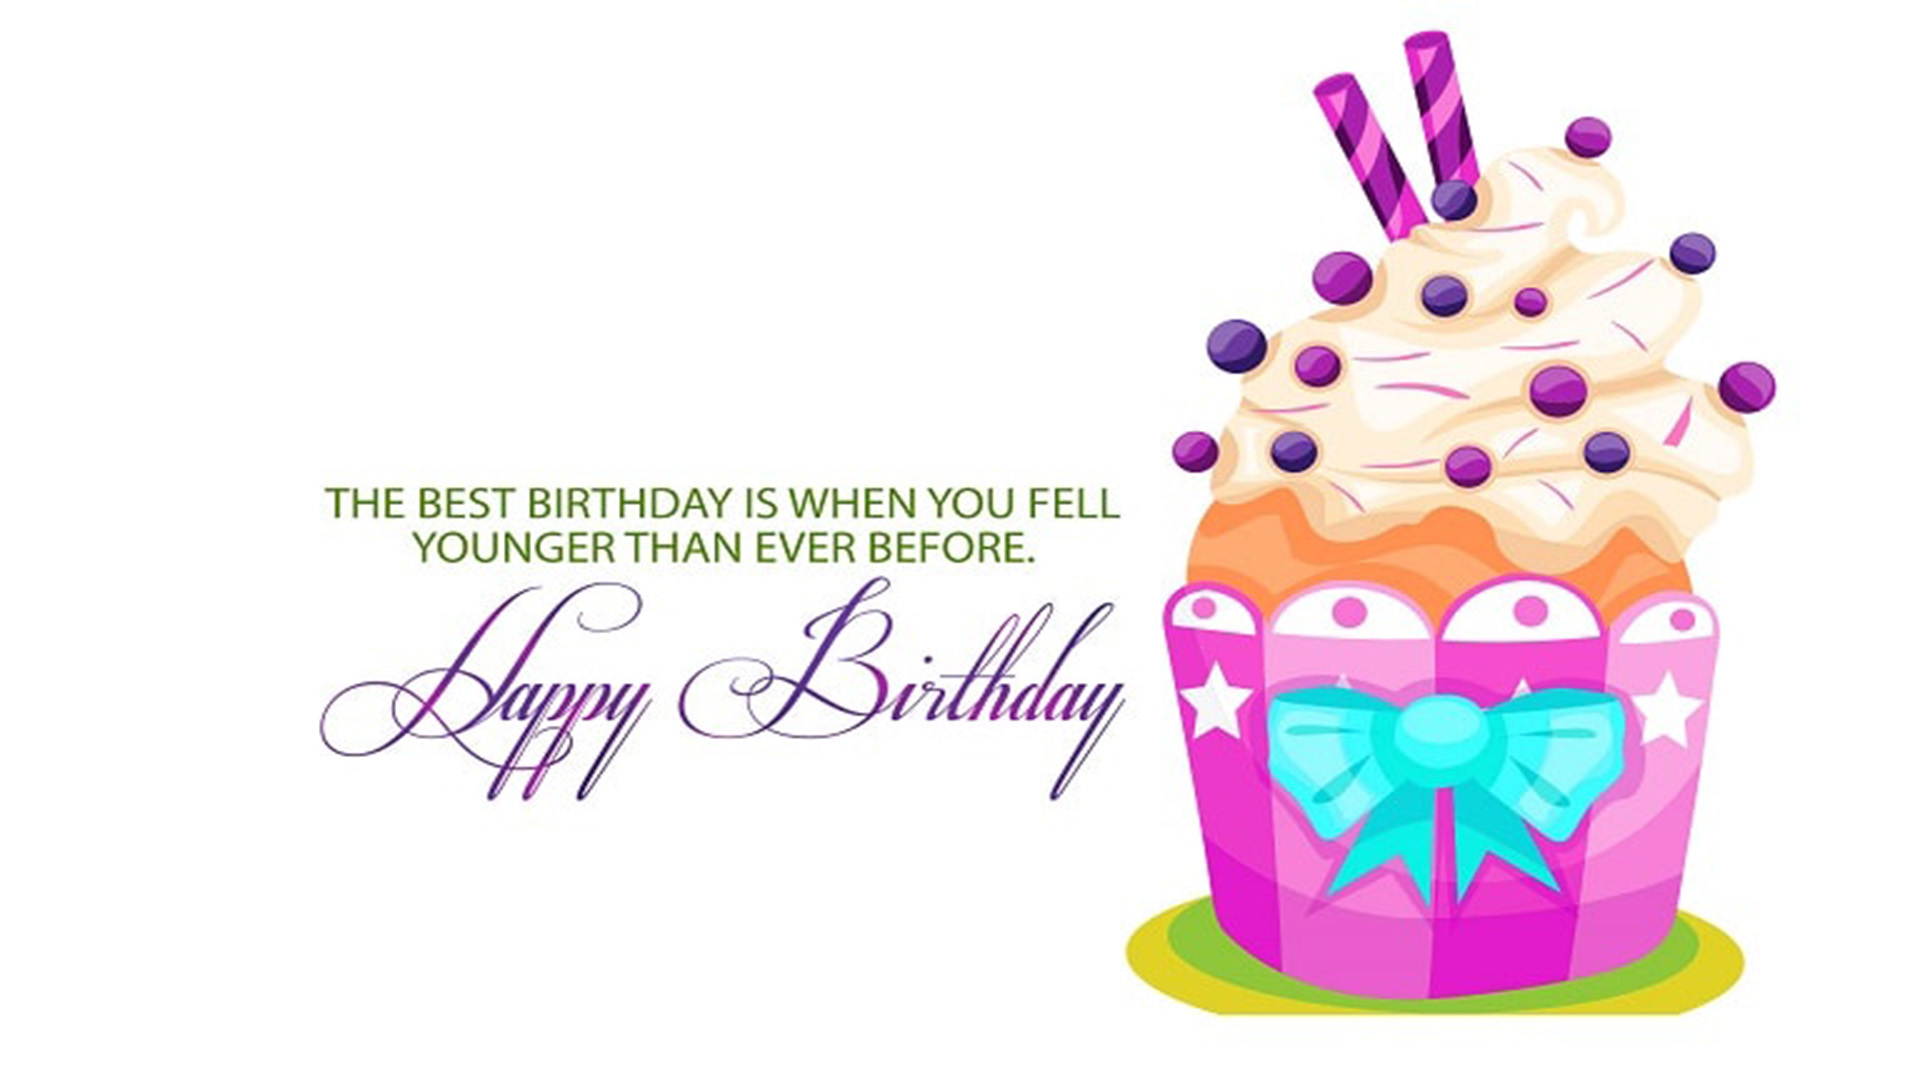 best birthday quotes image hd